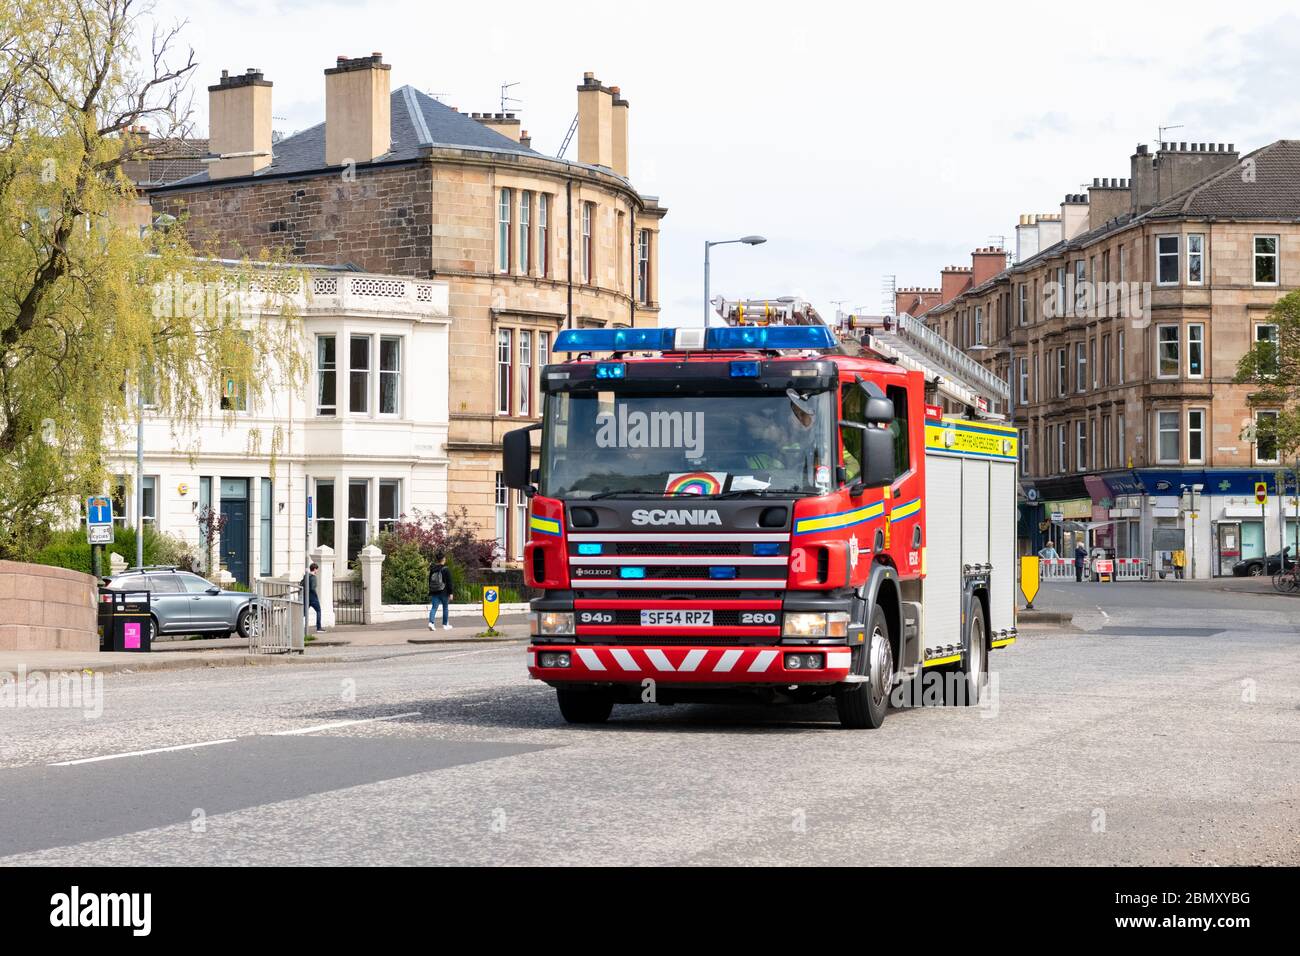 Fire engine with blue lights responding to an emergency during the coronavirus lockdown, Glasgow, Scotland, UK - with rainbow picture in windscreen Stock Photo